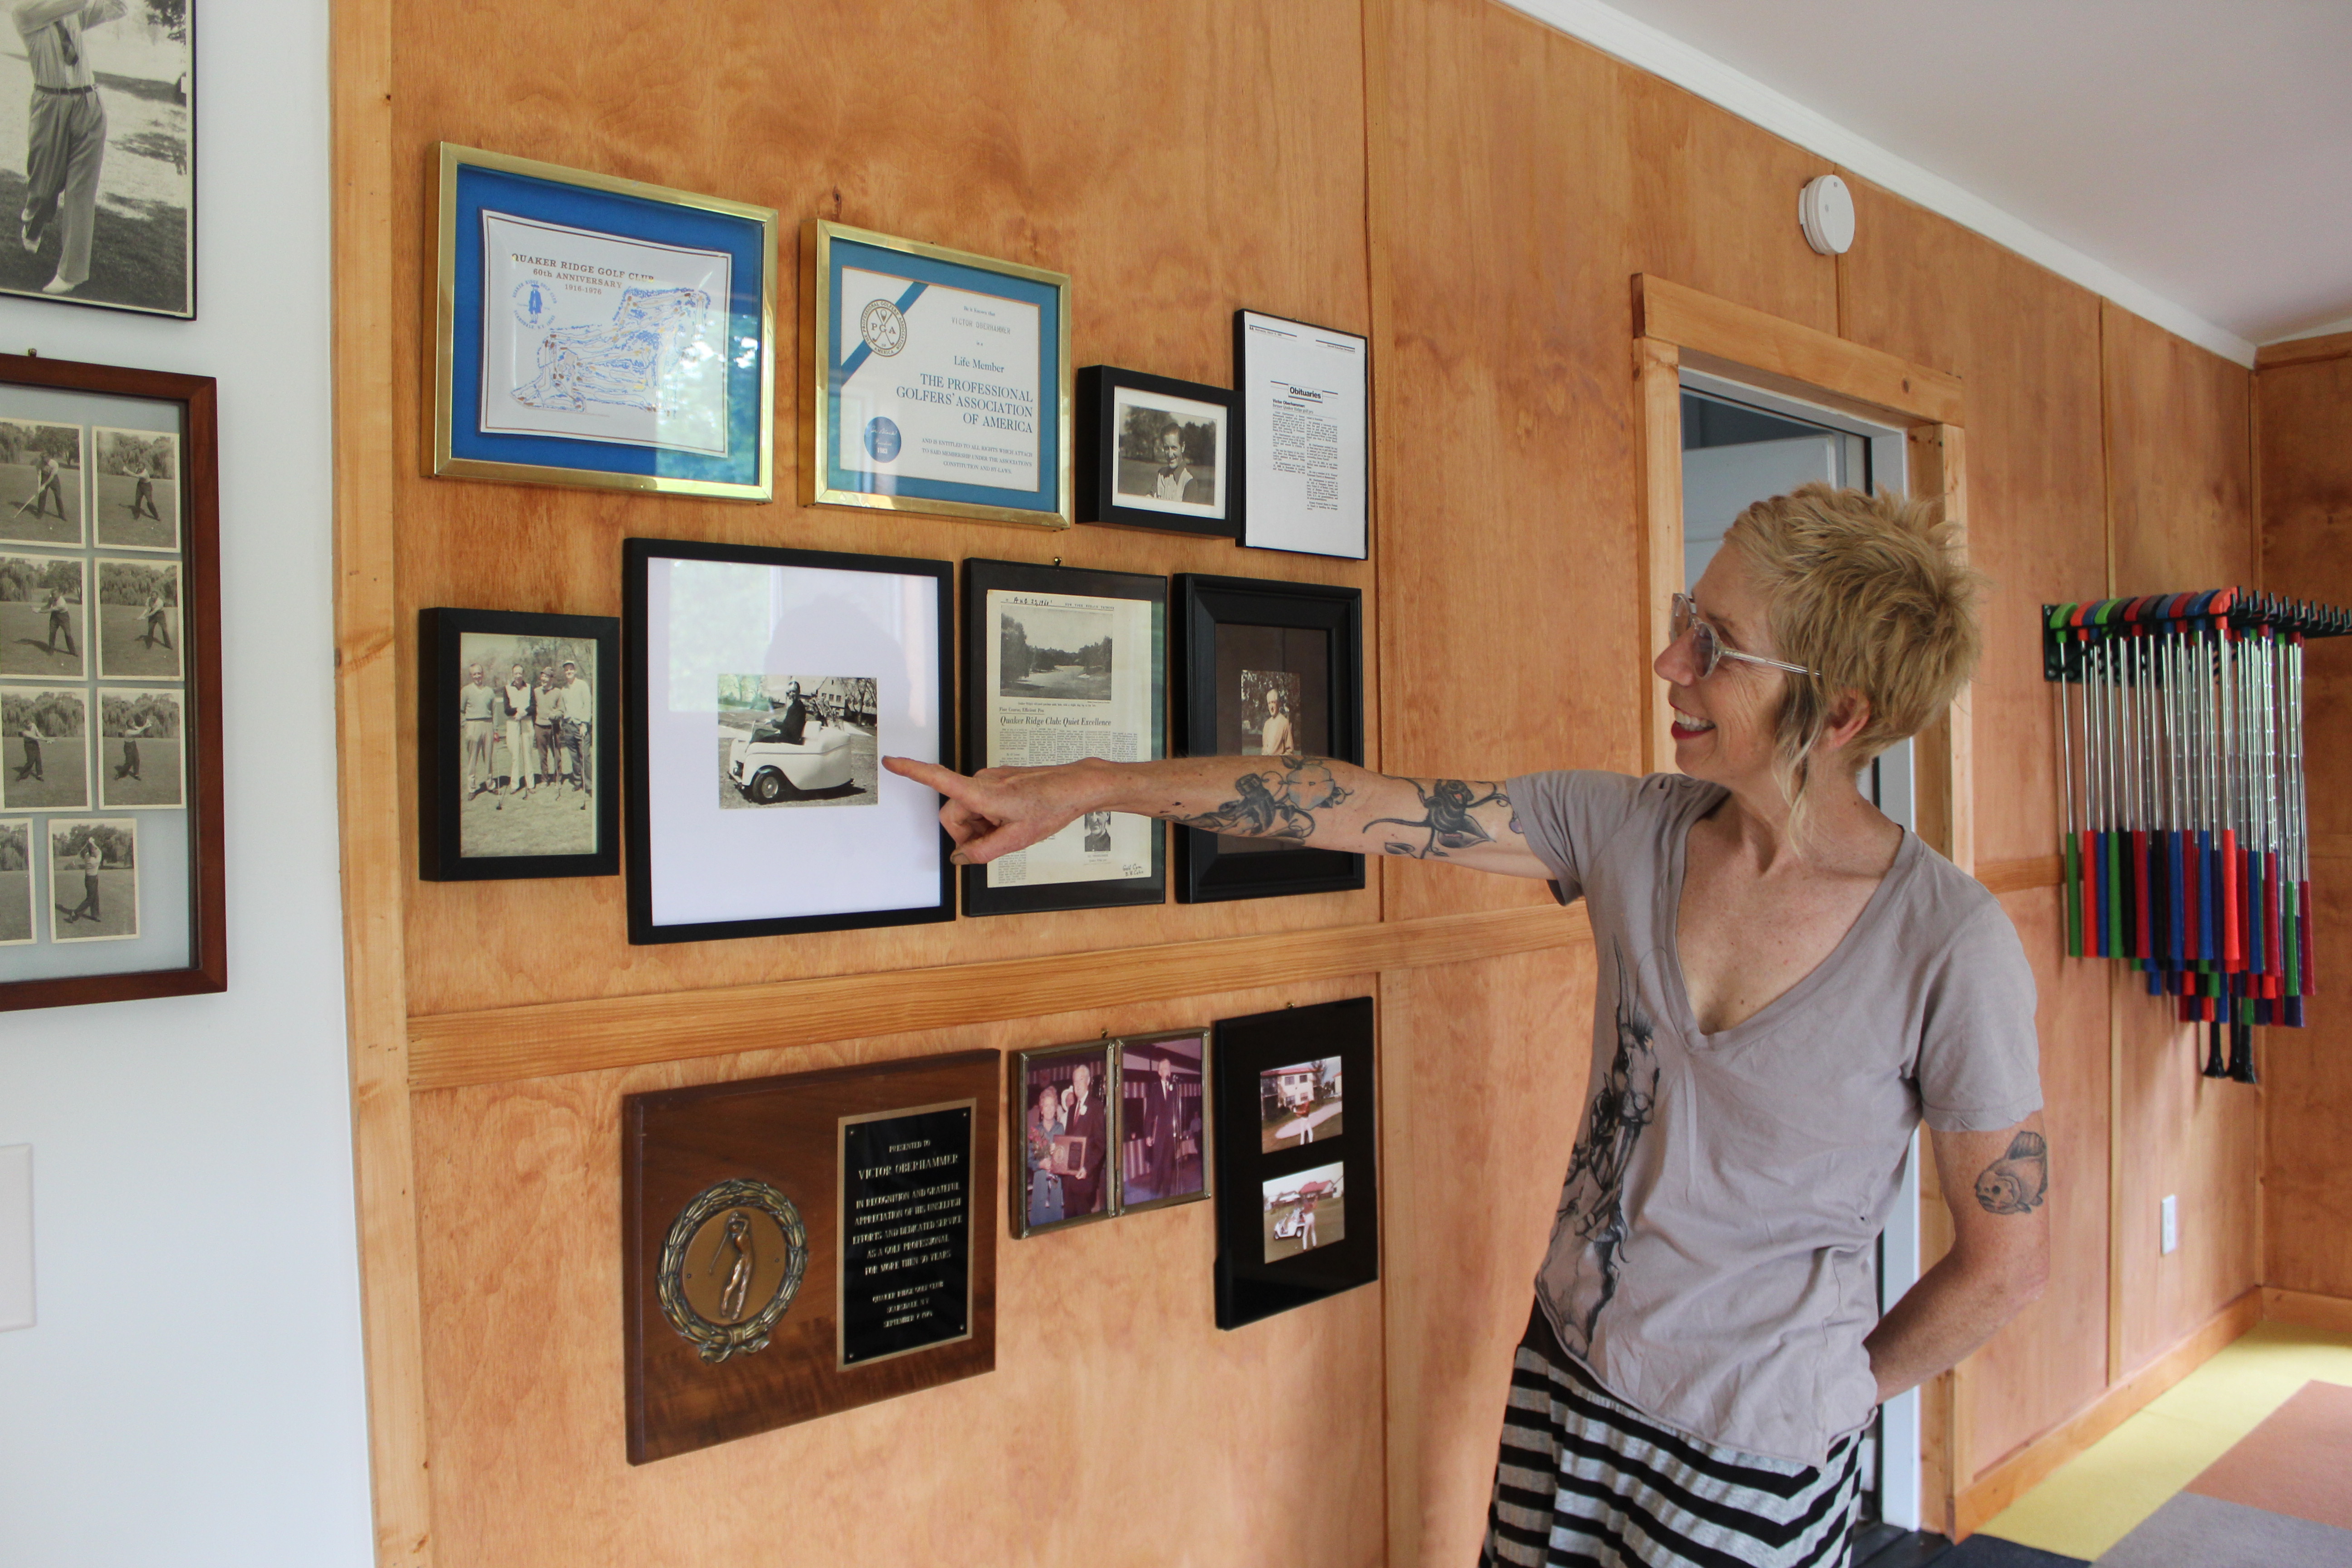 Kim Oberhammer points to photos and memorabilia of her grandfather, Victor.